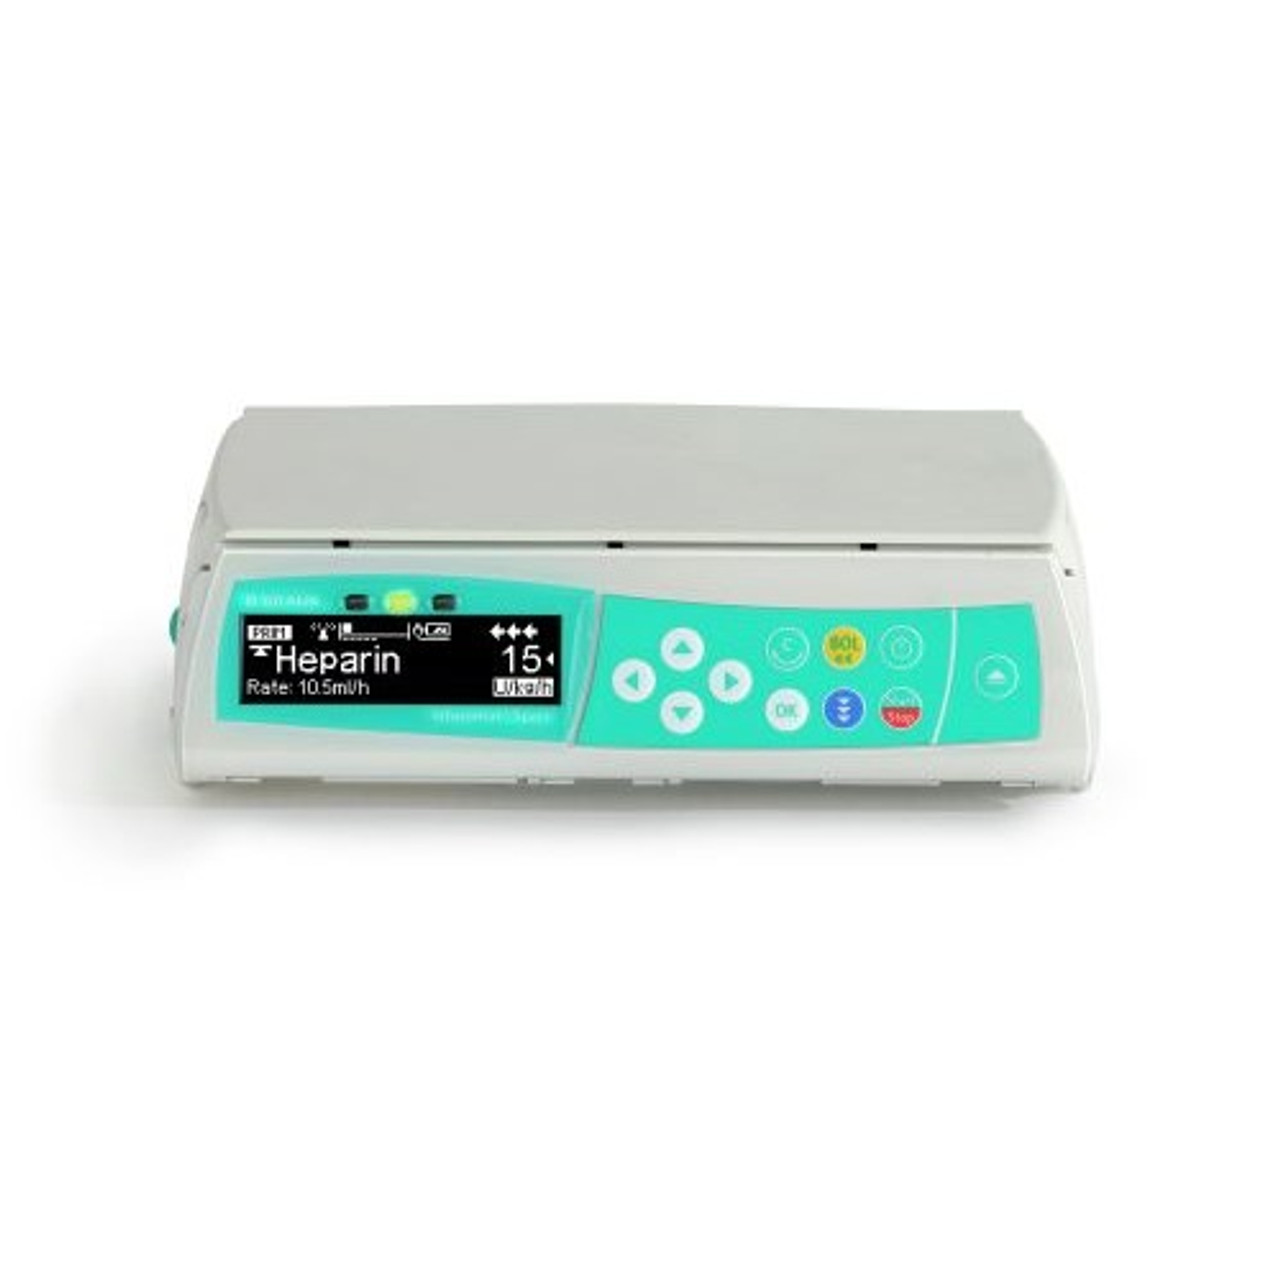 B Braun Infusomat Space Infusion Pumps